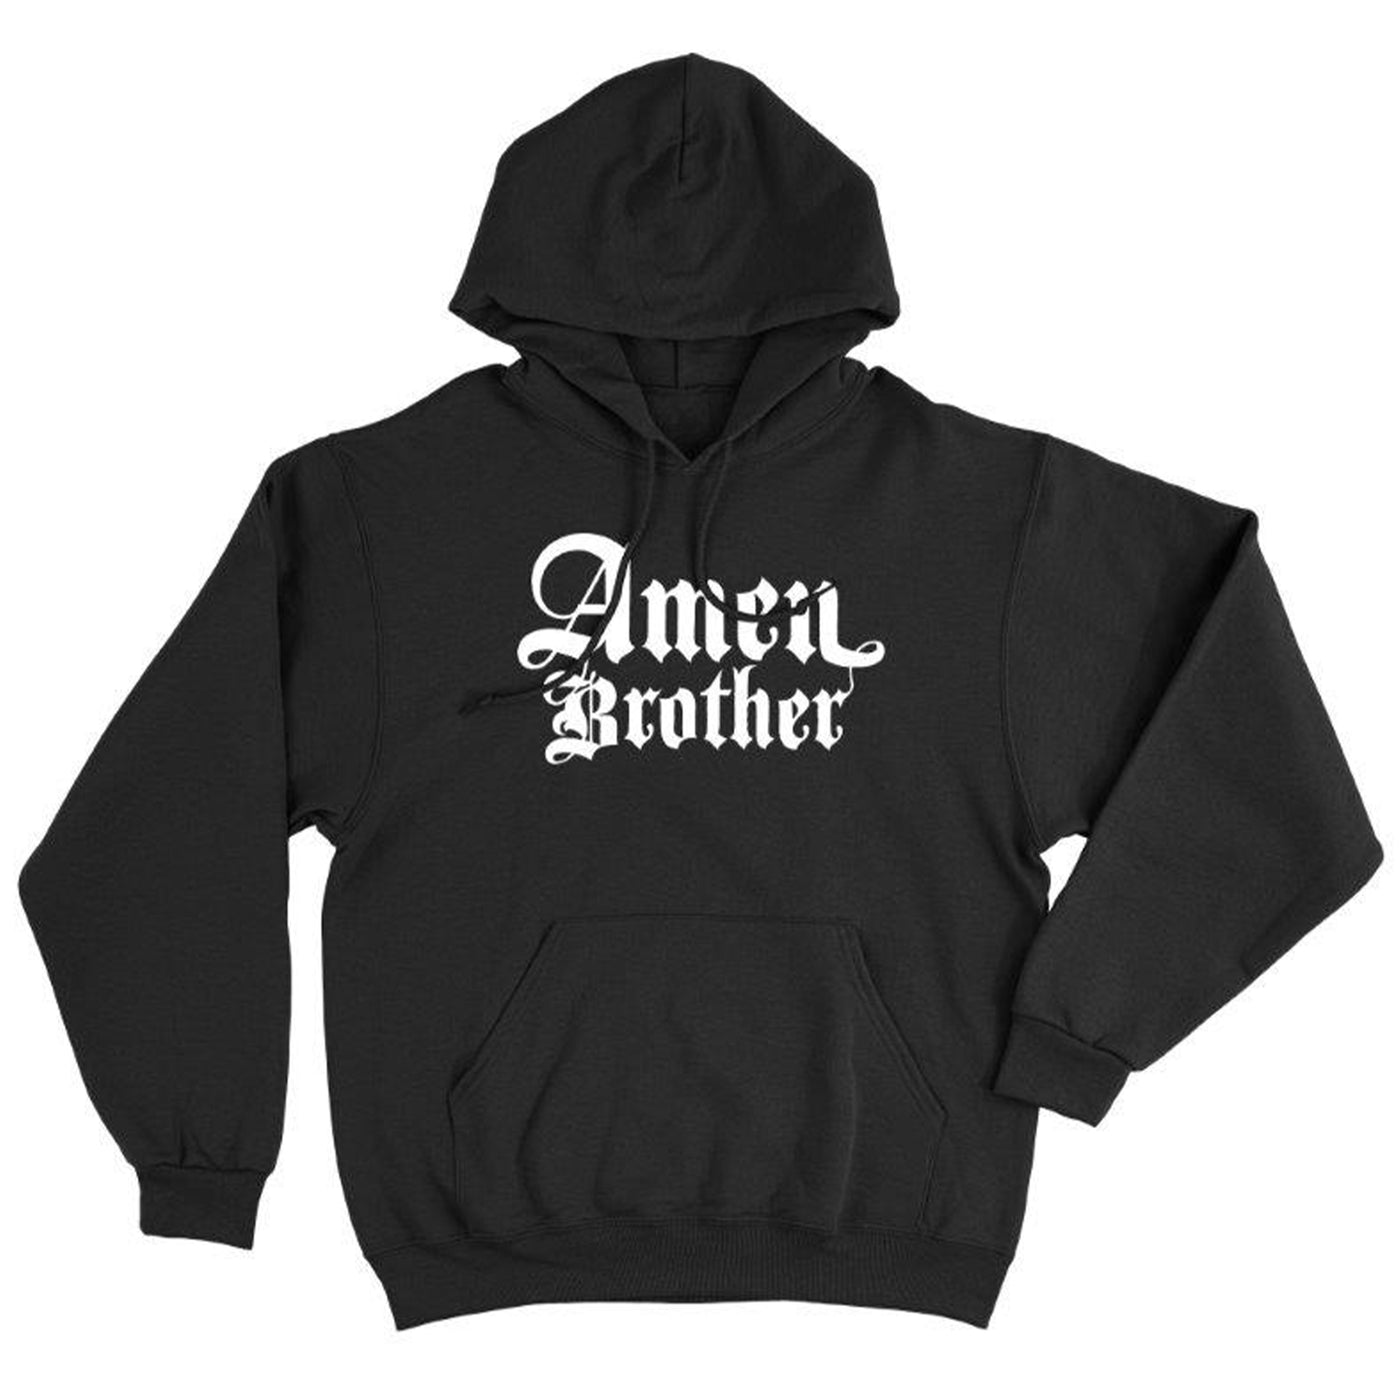 Amen Brother Hoody – Comfortable and Heavyweight